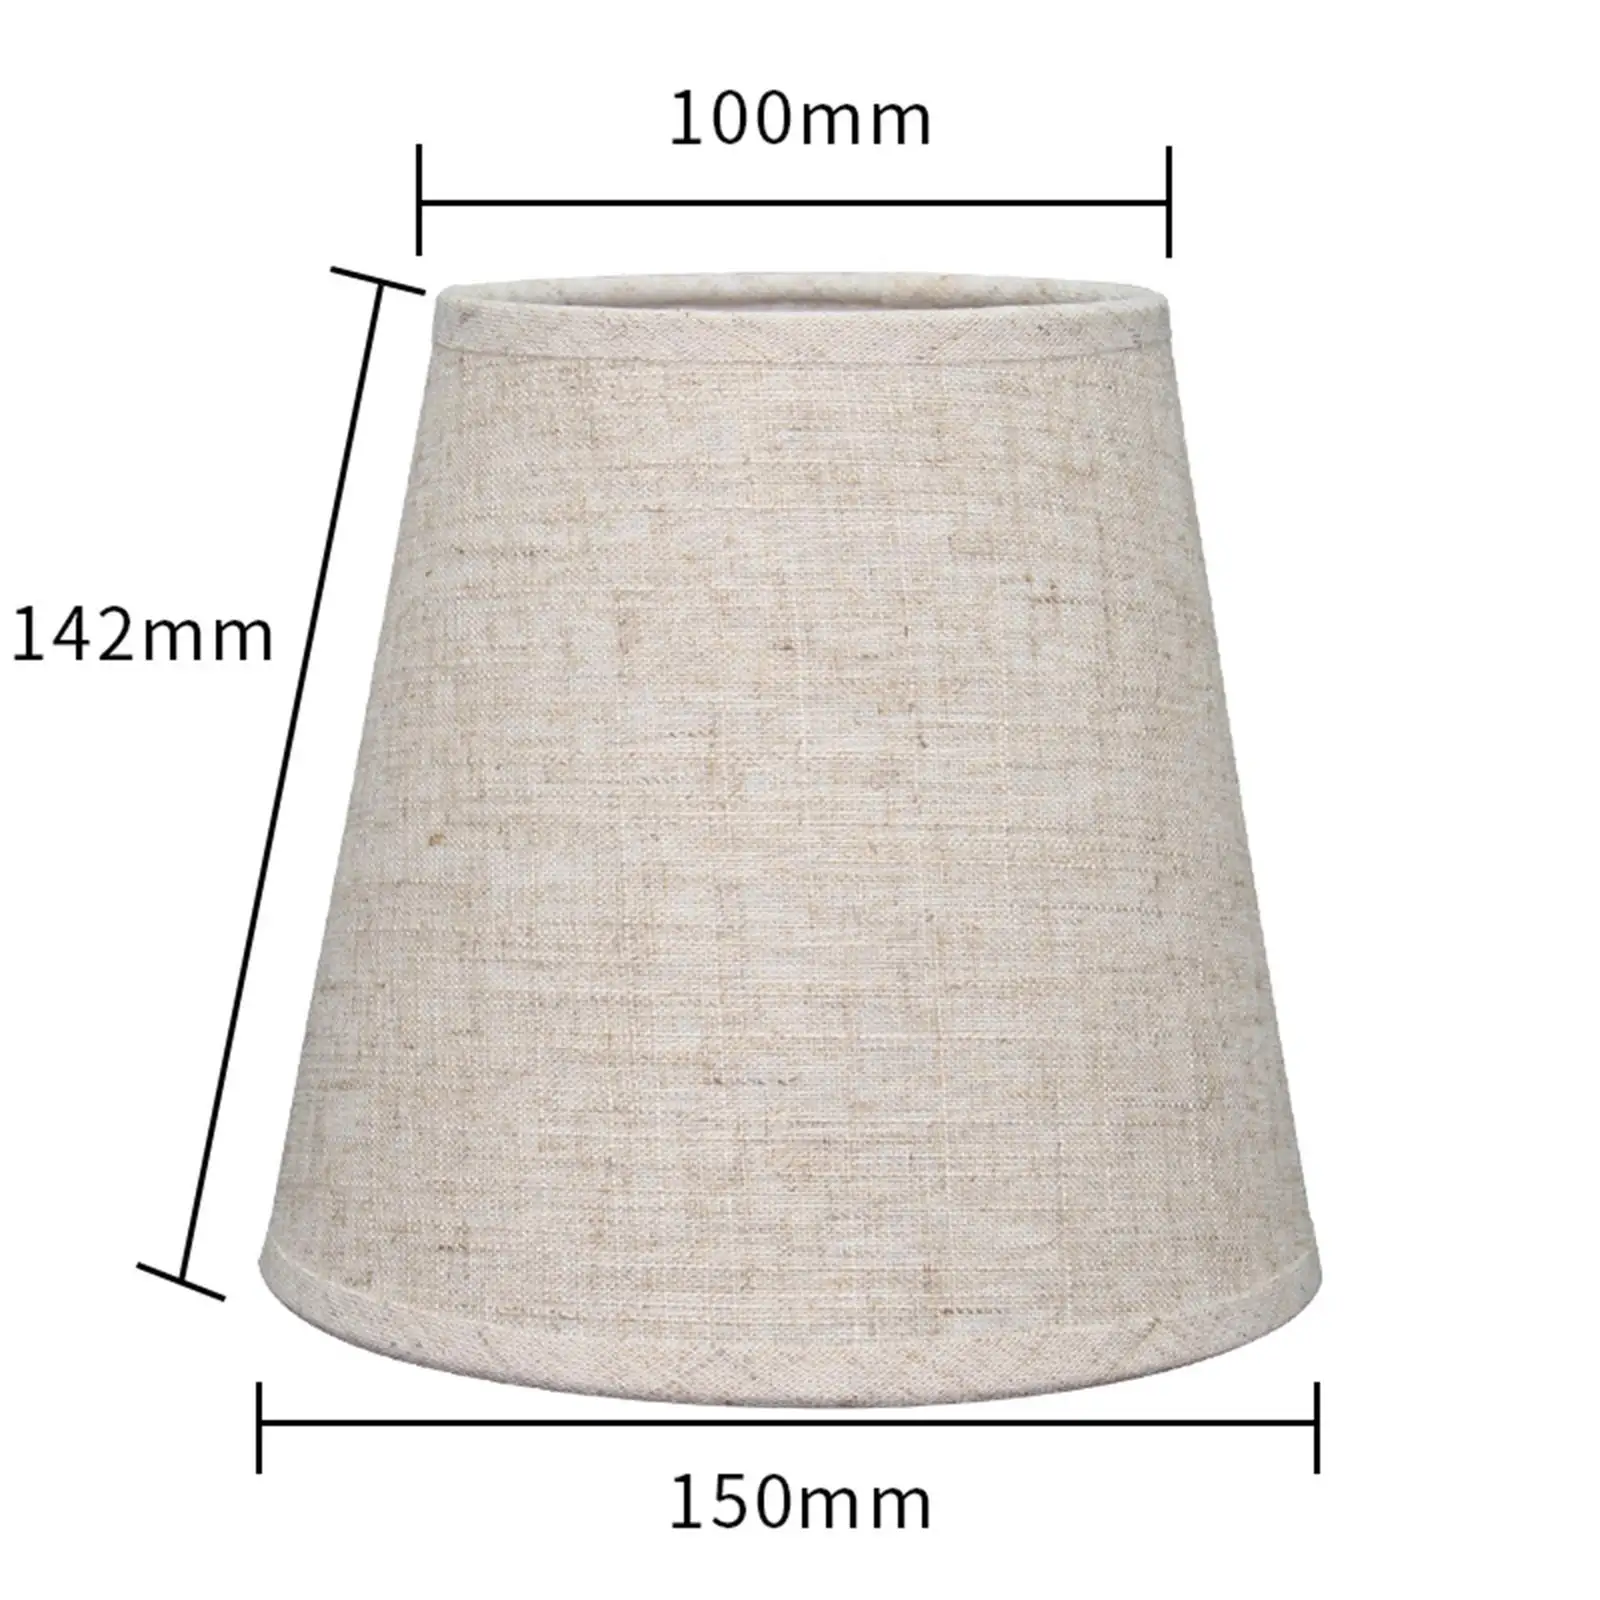 Burlap Lamp Shade Hand Crafted Jute Cloth Lamp Cover for Desk Lamps Floor Light